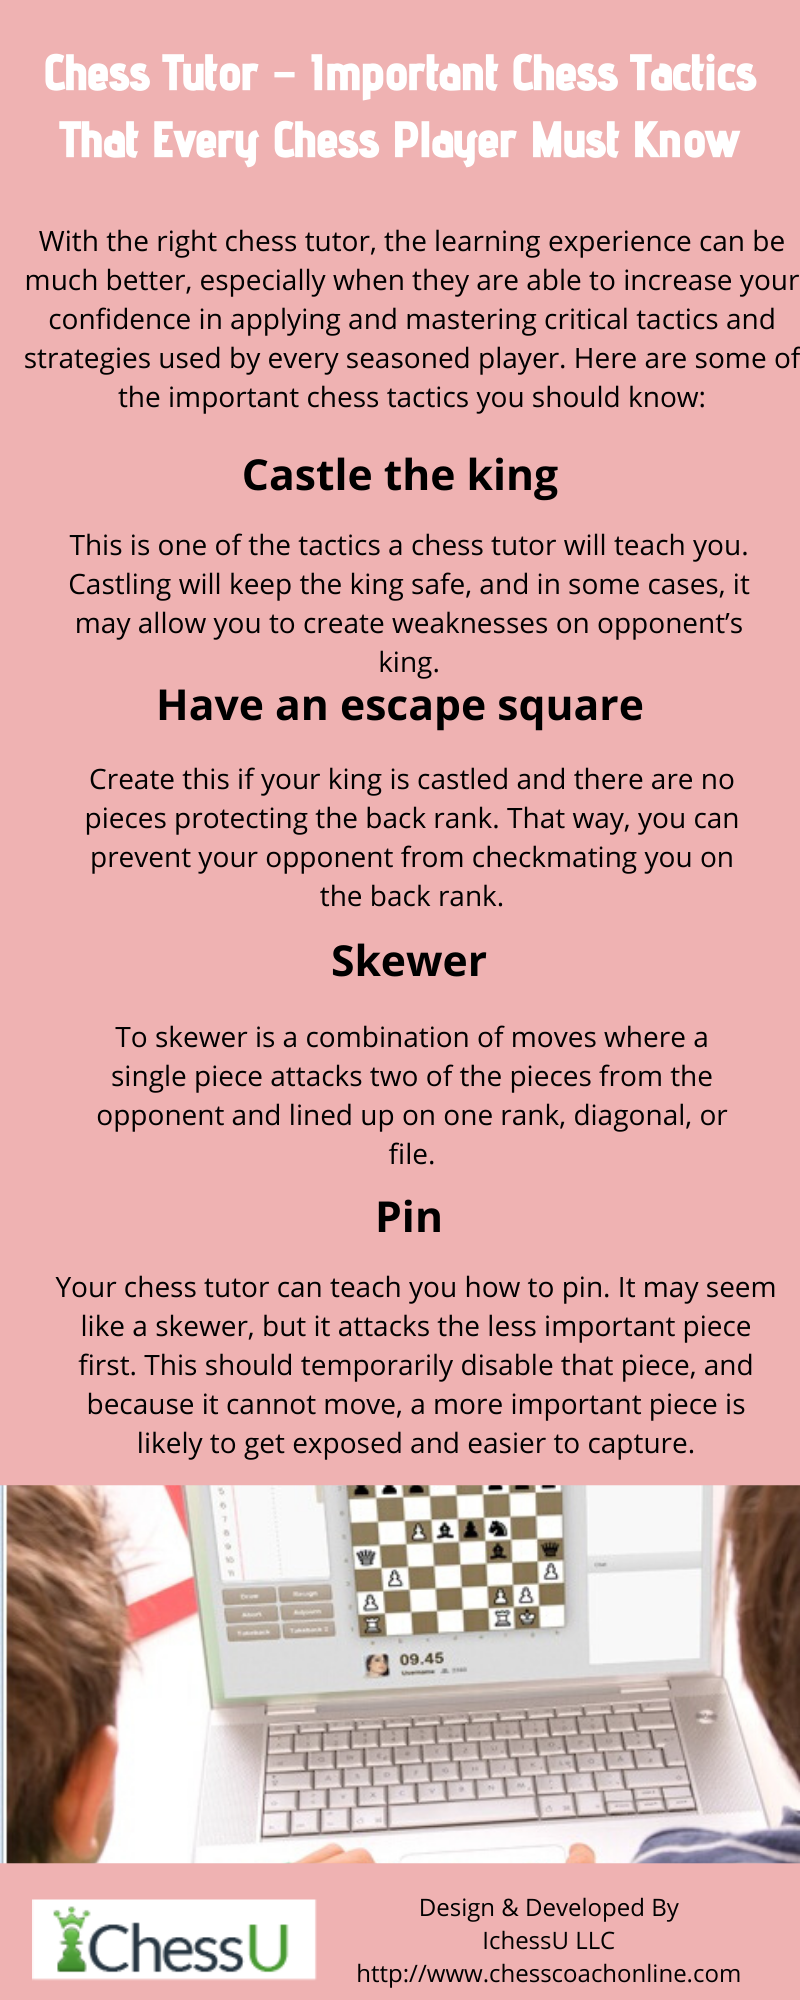 Chess Tutor – Important Chess Tactics That Every Chess Player Must Know.png Develop your chess strategy and learn important tactics by signing up for chess lessons. A chess tutor can help you learn advanced tactics and teach you how to apply them more effectively. Online lessons are available, in case you want more flexibility in by IchessU